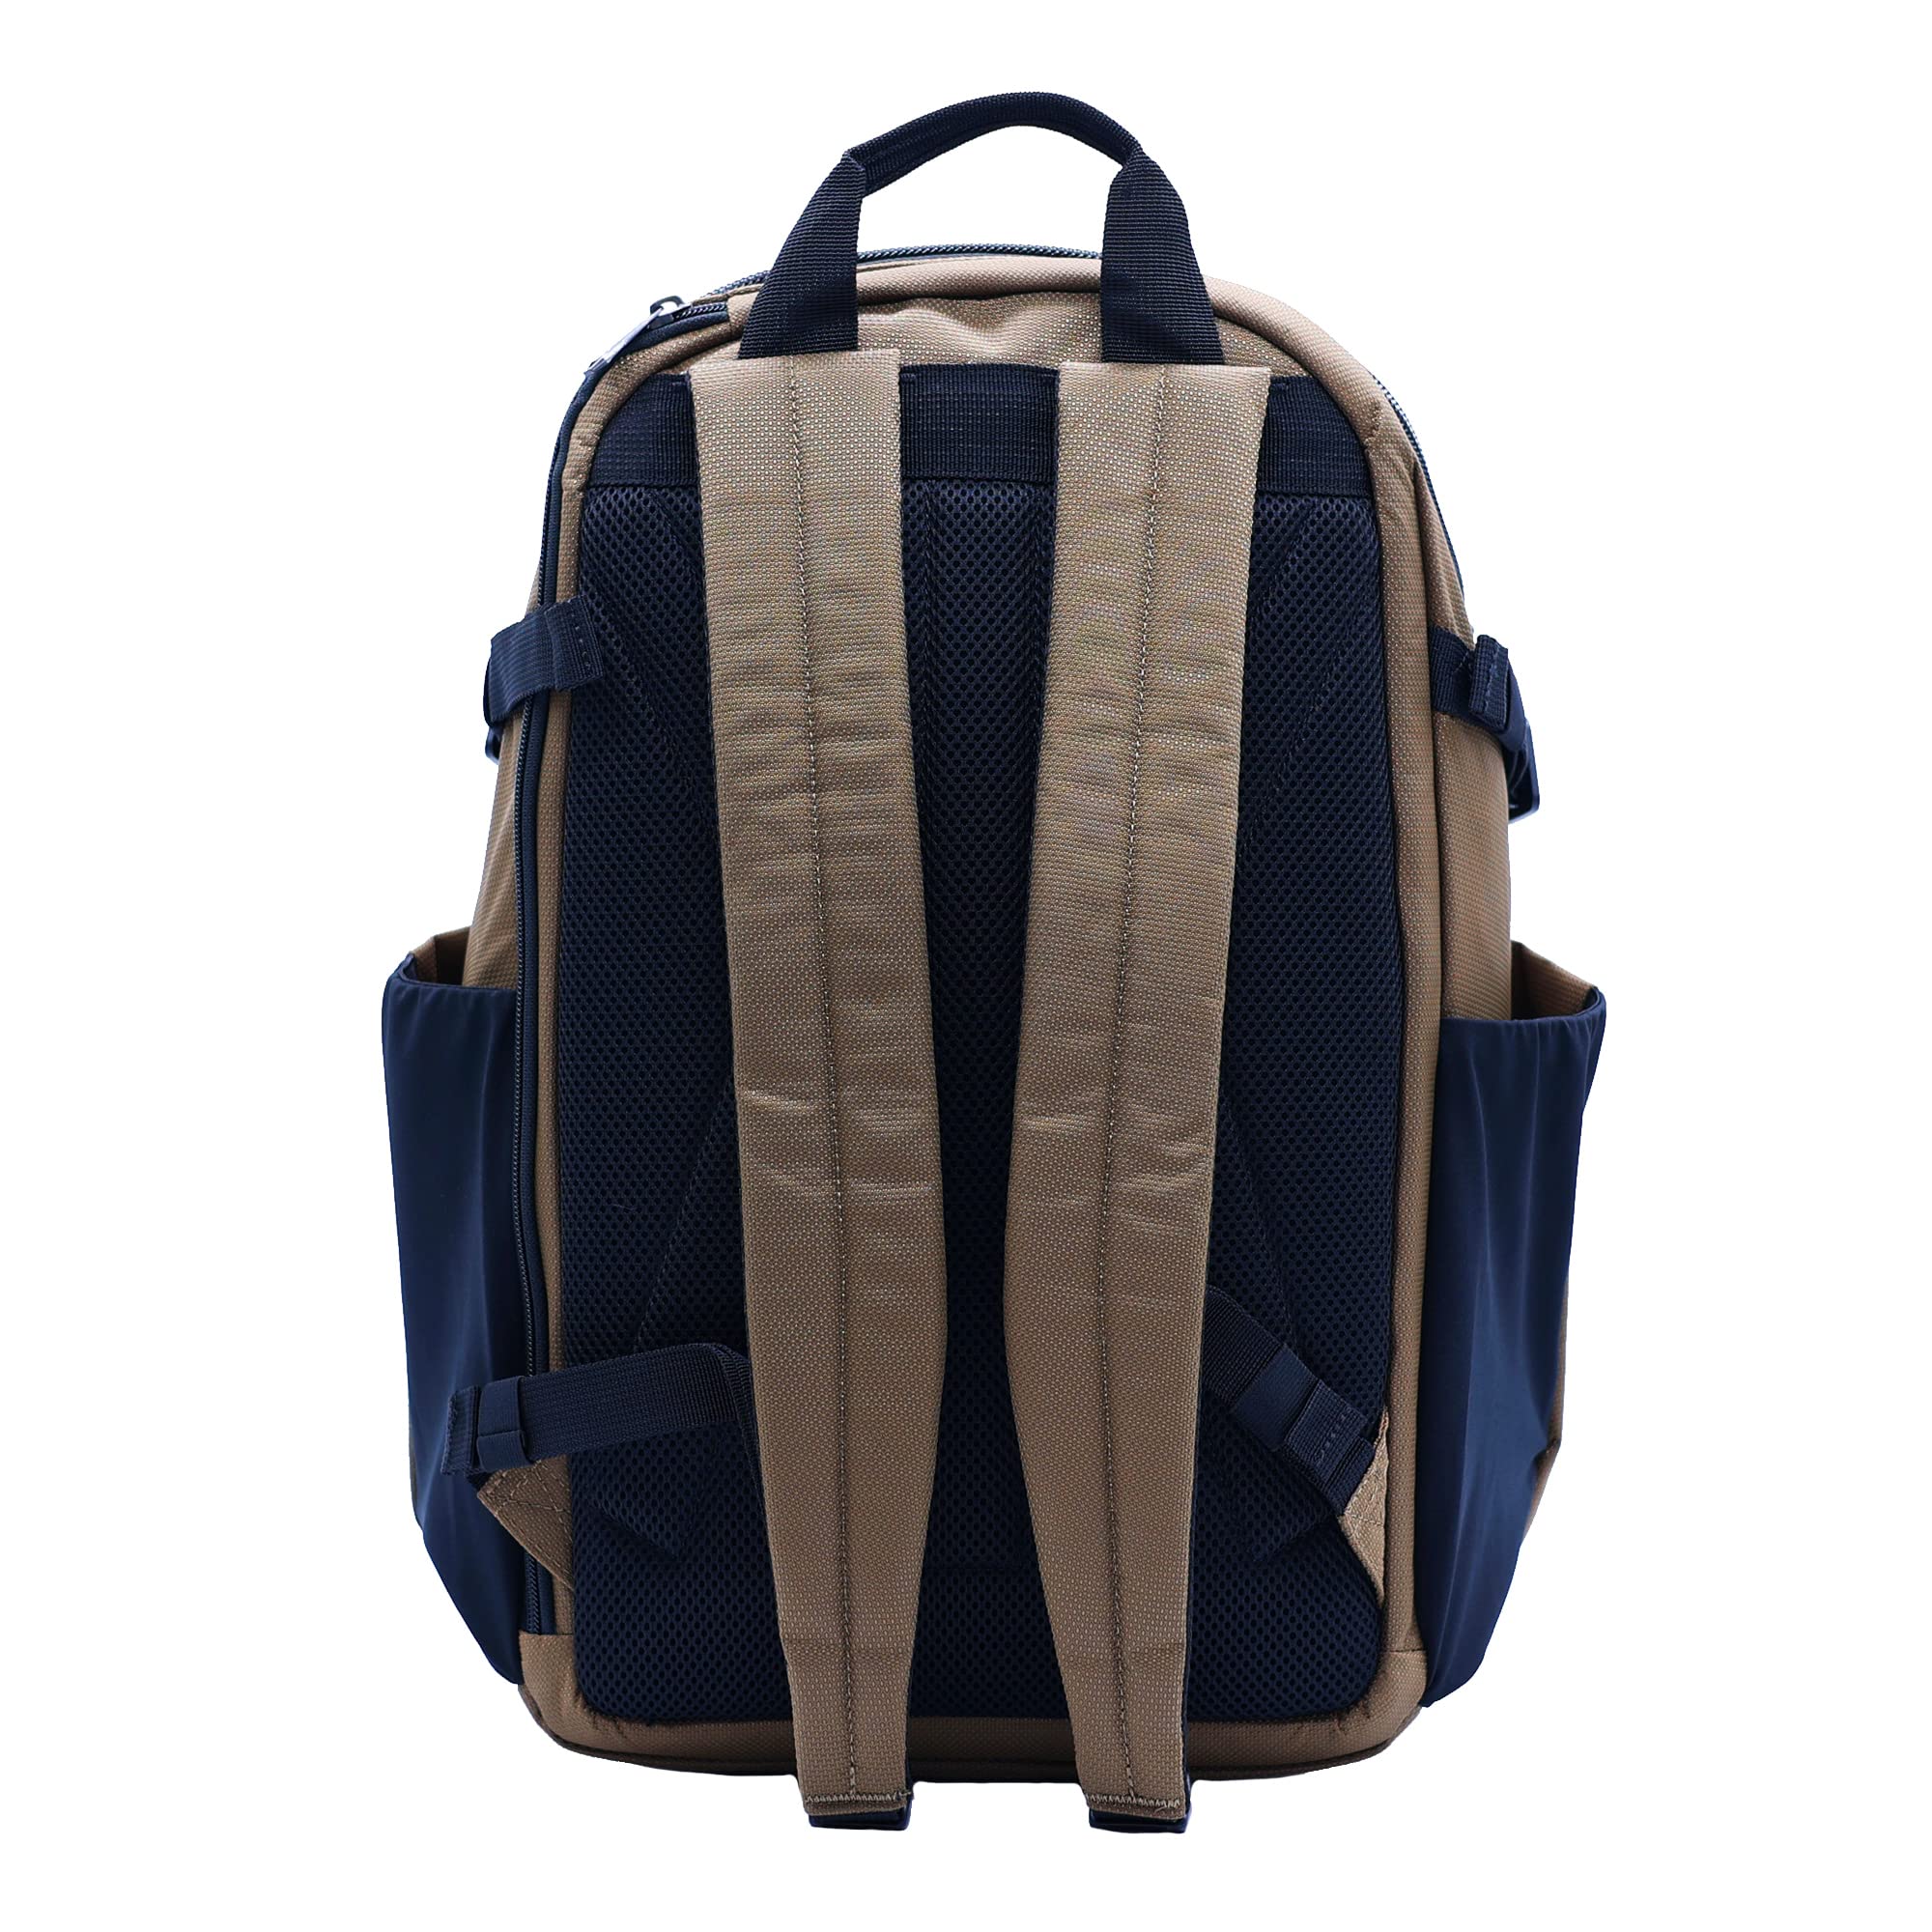 WOLVERINE 33l Cargo Pro Backpack with Expandable Helmet Stash, Laptop Compartment, 7 Pockets & Moisture Wicking Straps